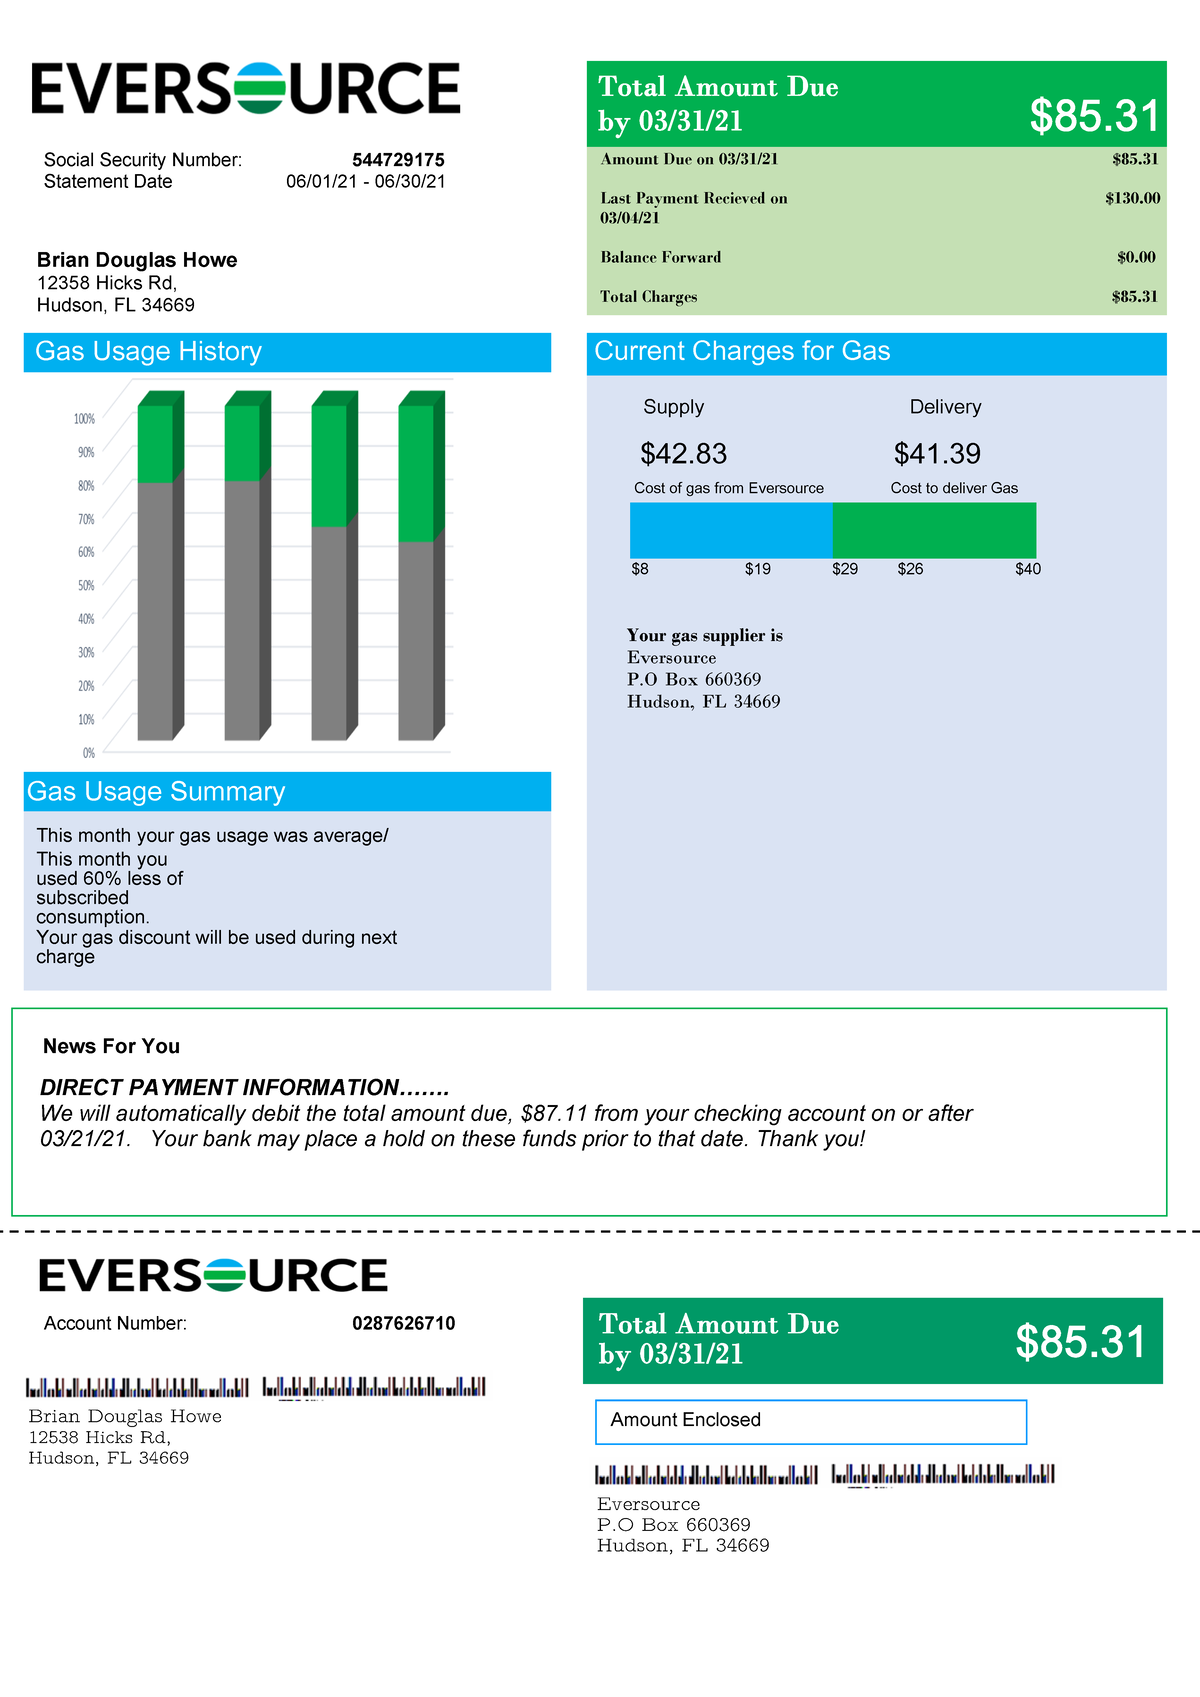 eversource-gas-bill-0450007543365-supply-delivery-42-41-cost-of